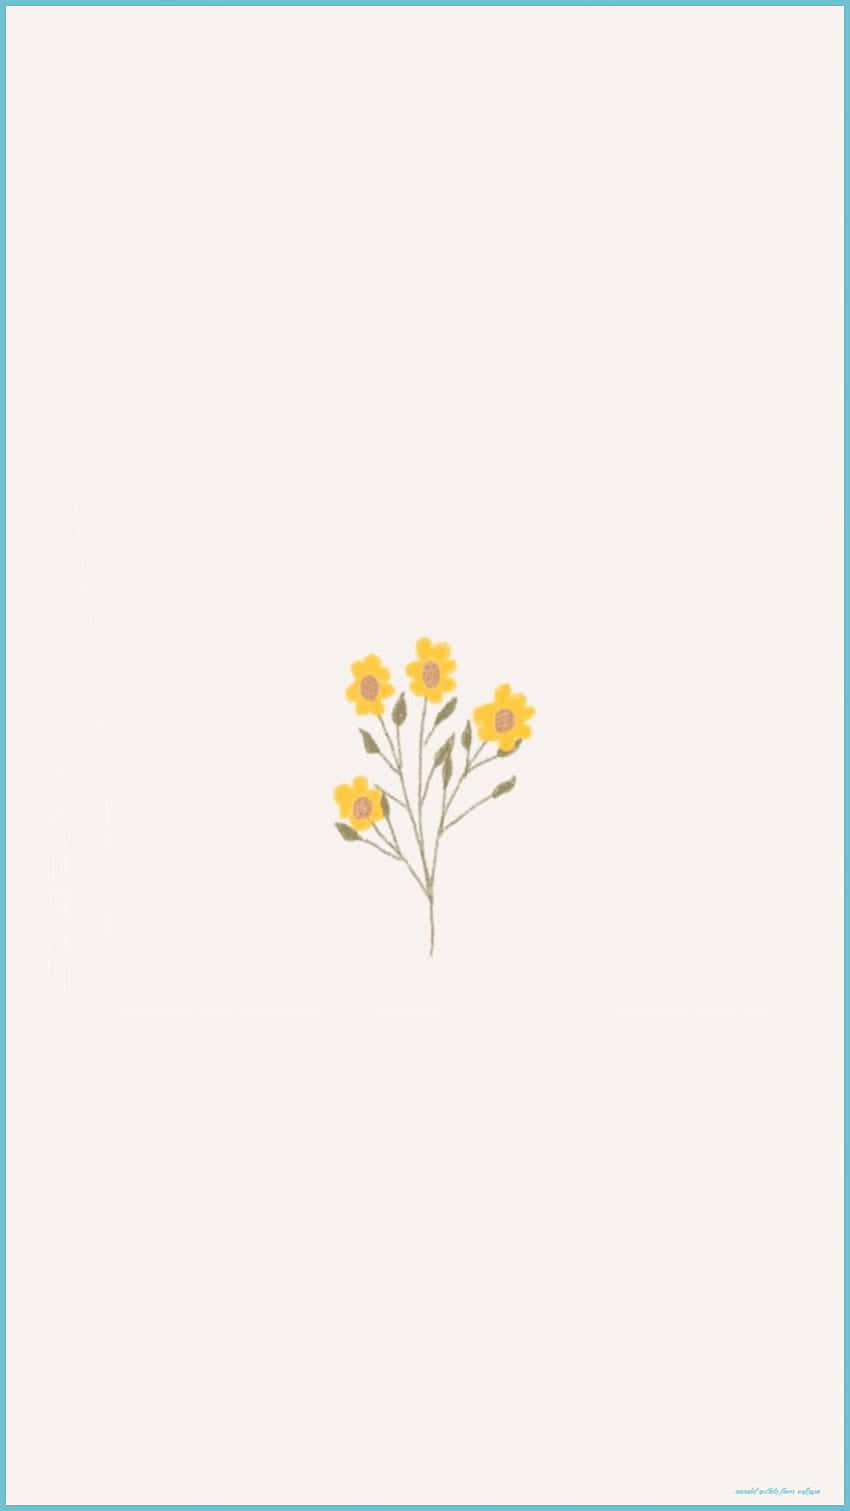 A neutral-colored, minimalist aesthetic image for your background